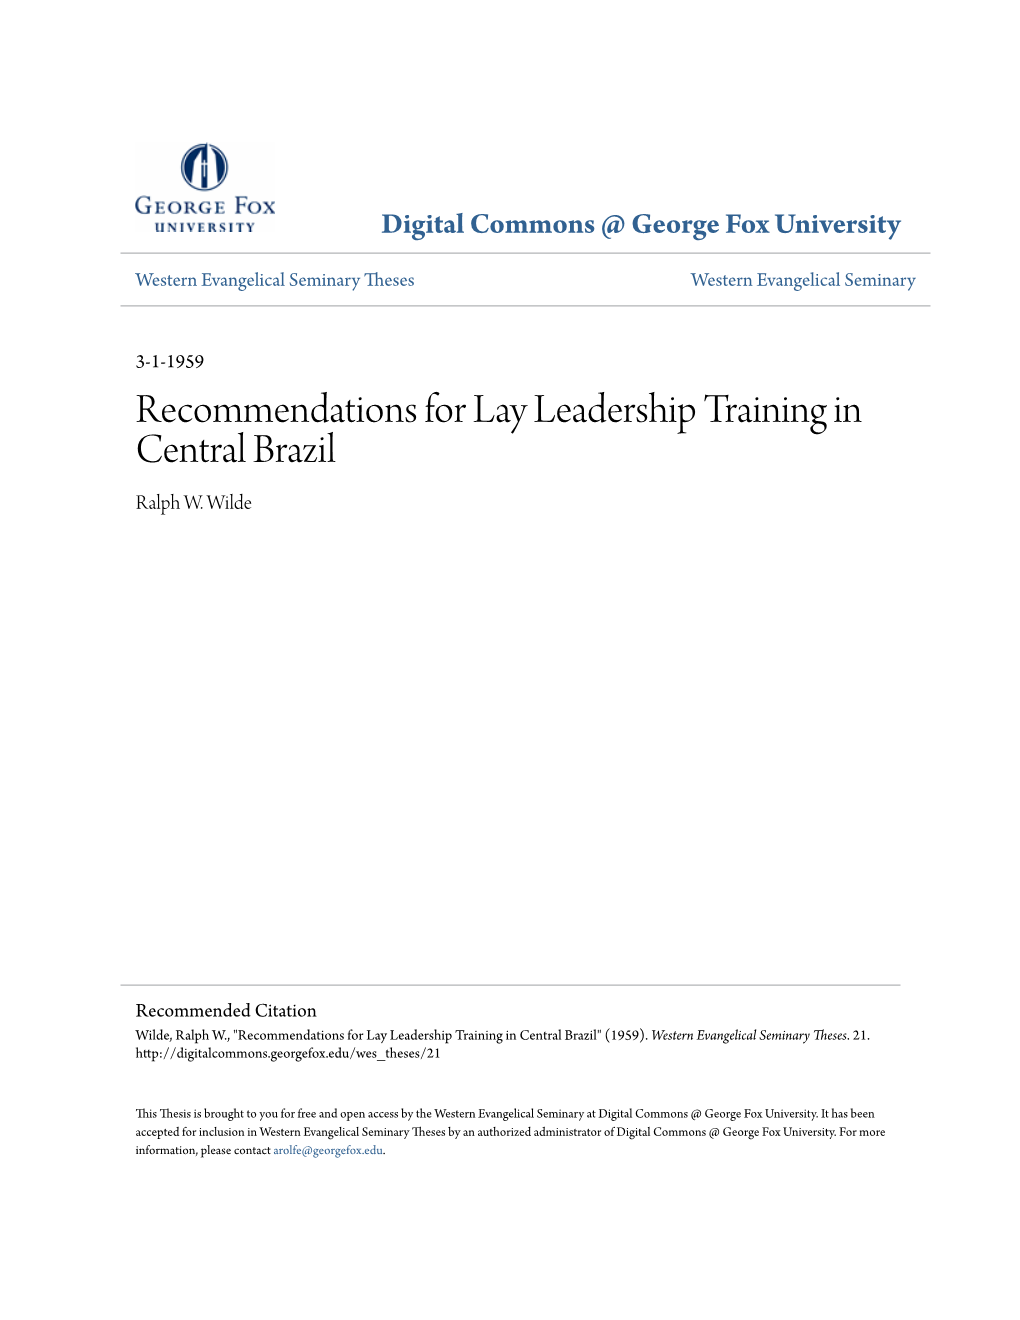 Recommendations for Lay Leadership Training in Central Brazil Ralph W